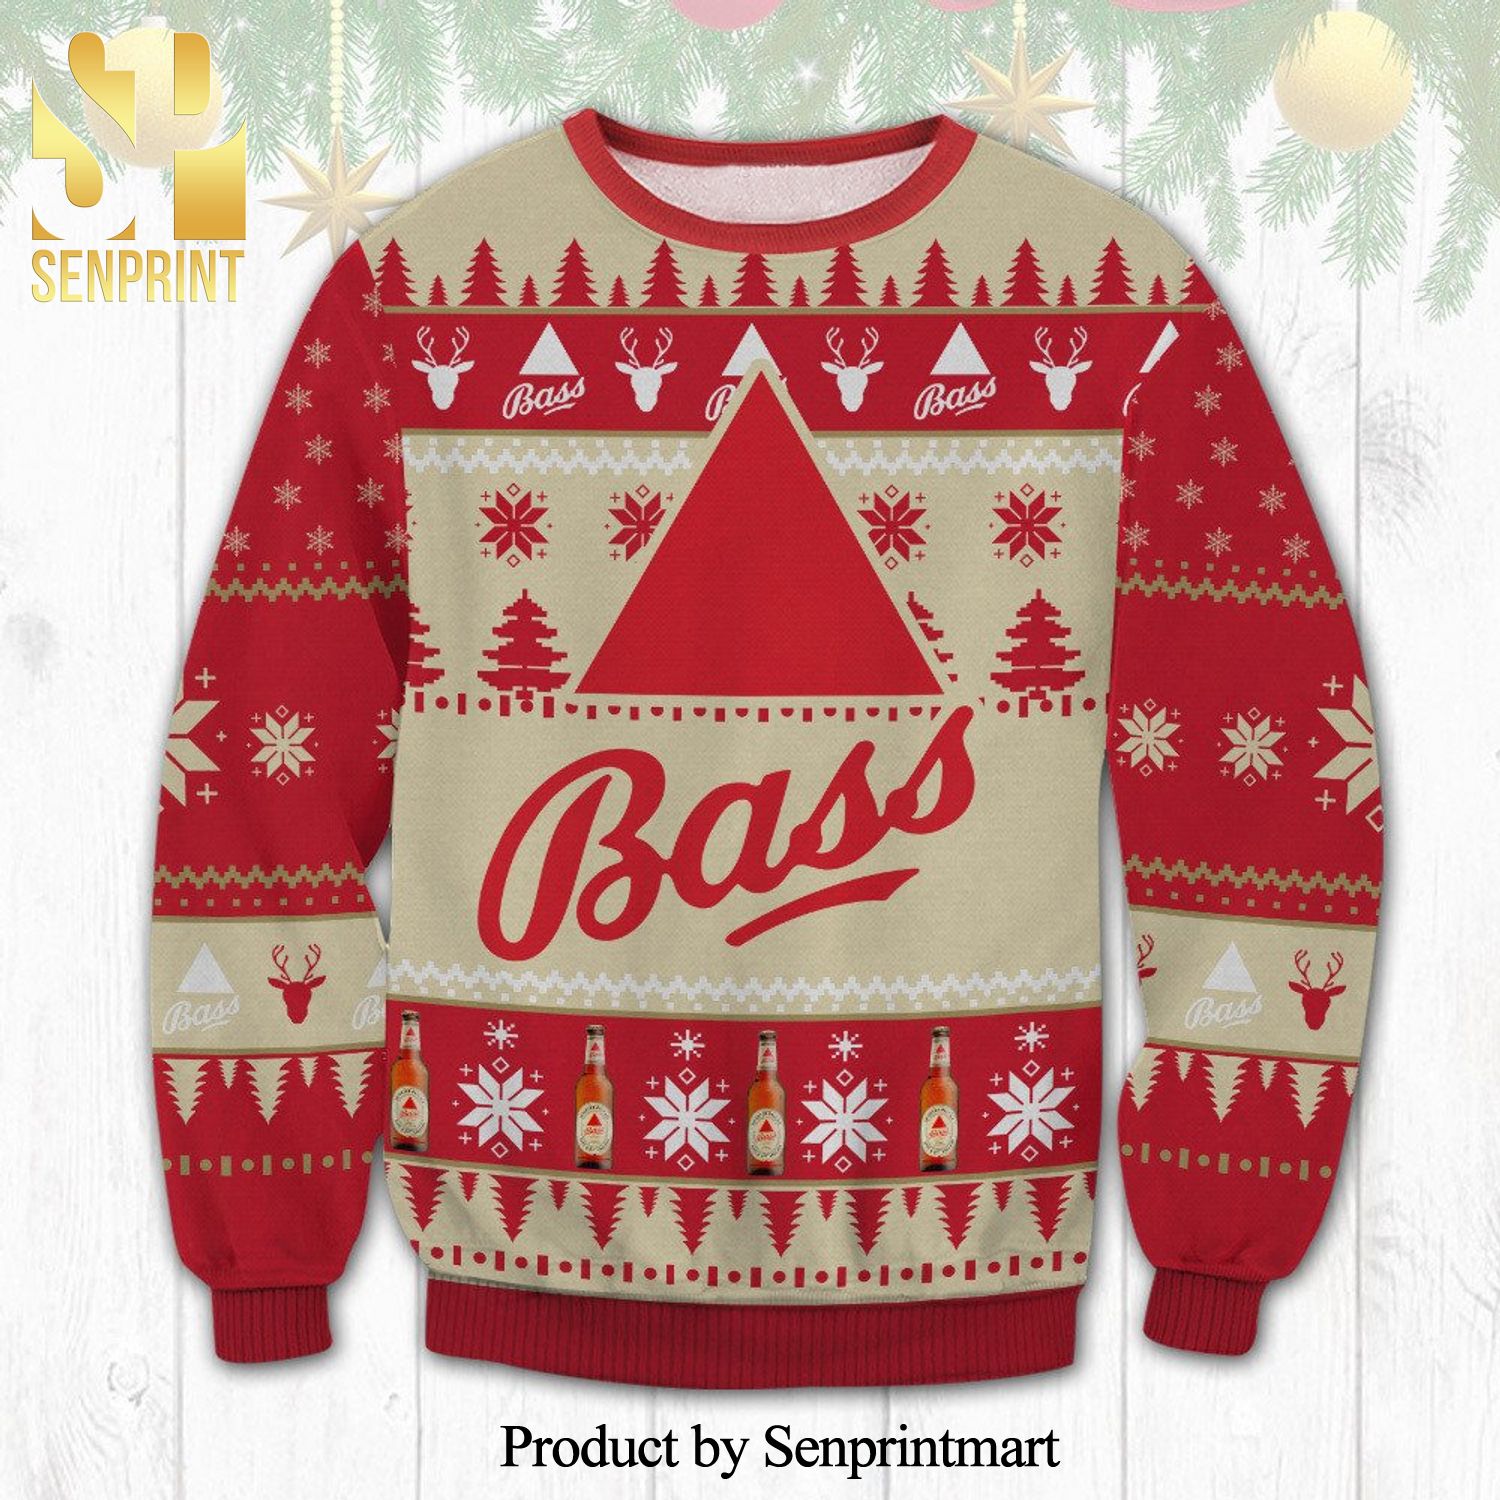 Bass Ale Beer Snowflake Knitted Ugly Christmas Sweater